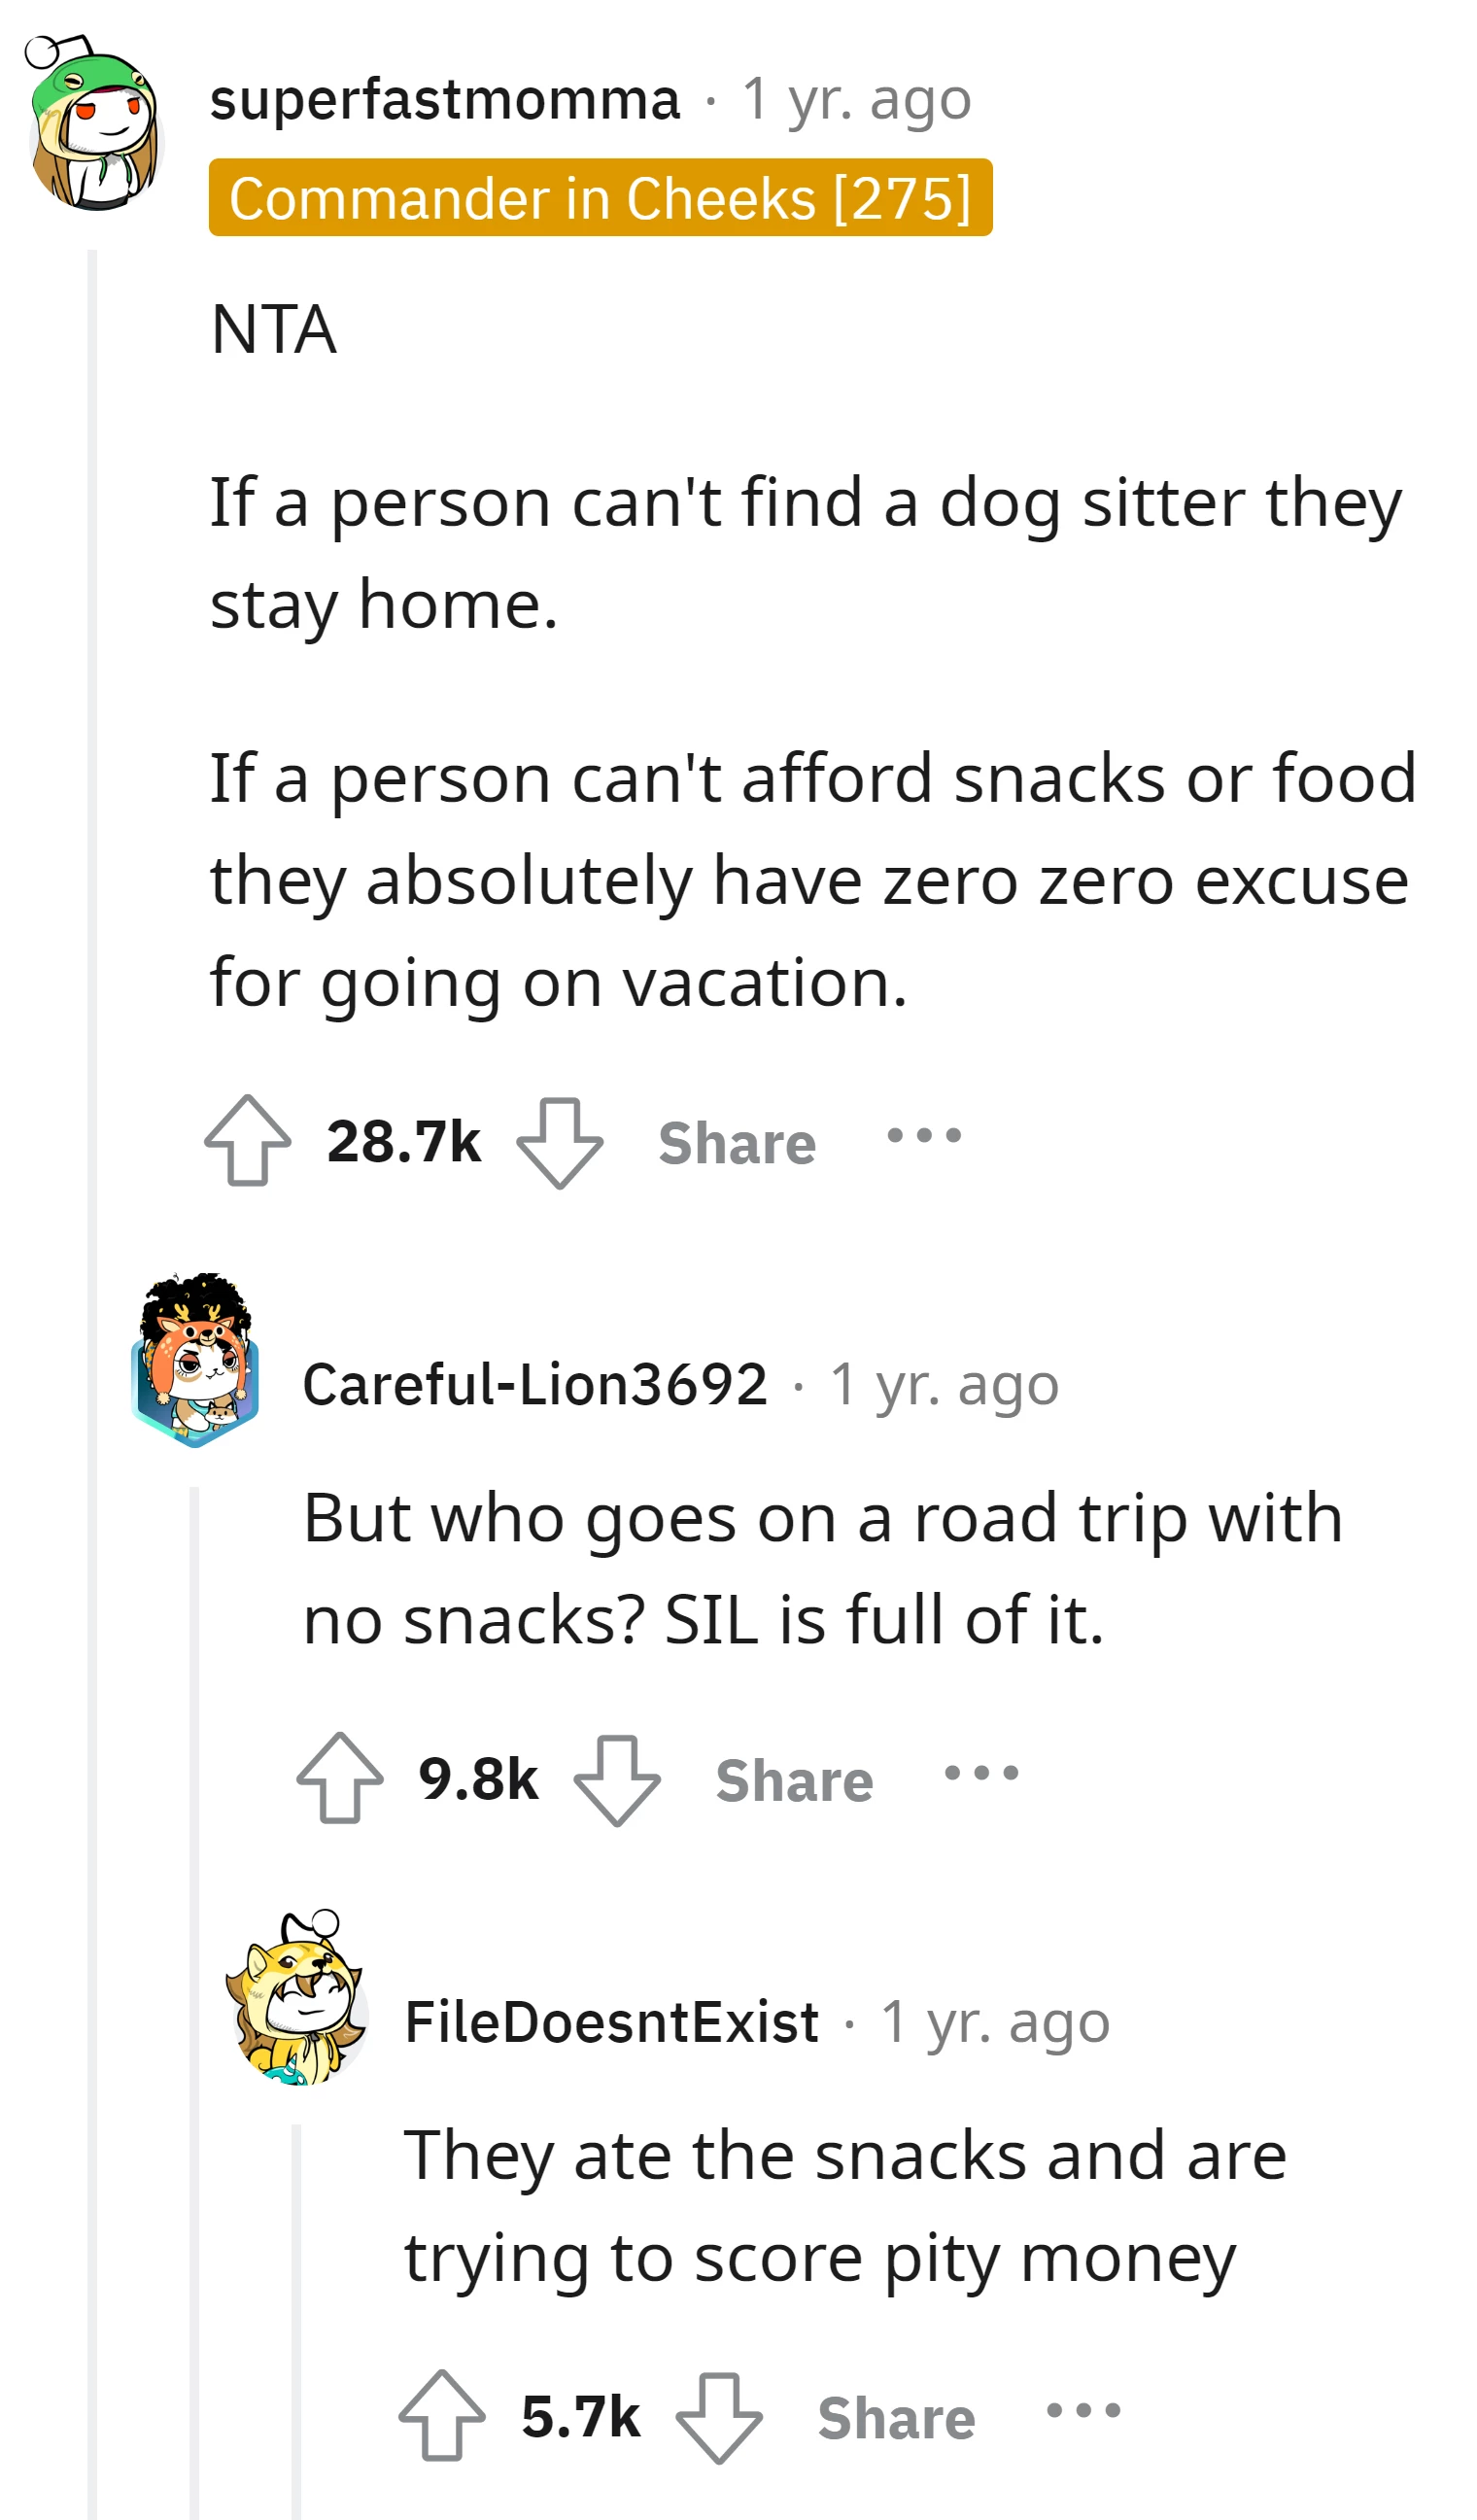 The SIL has no excuse for going on a trip